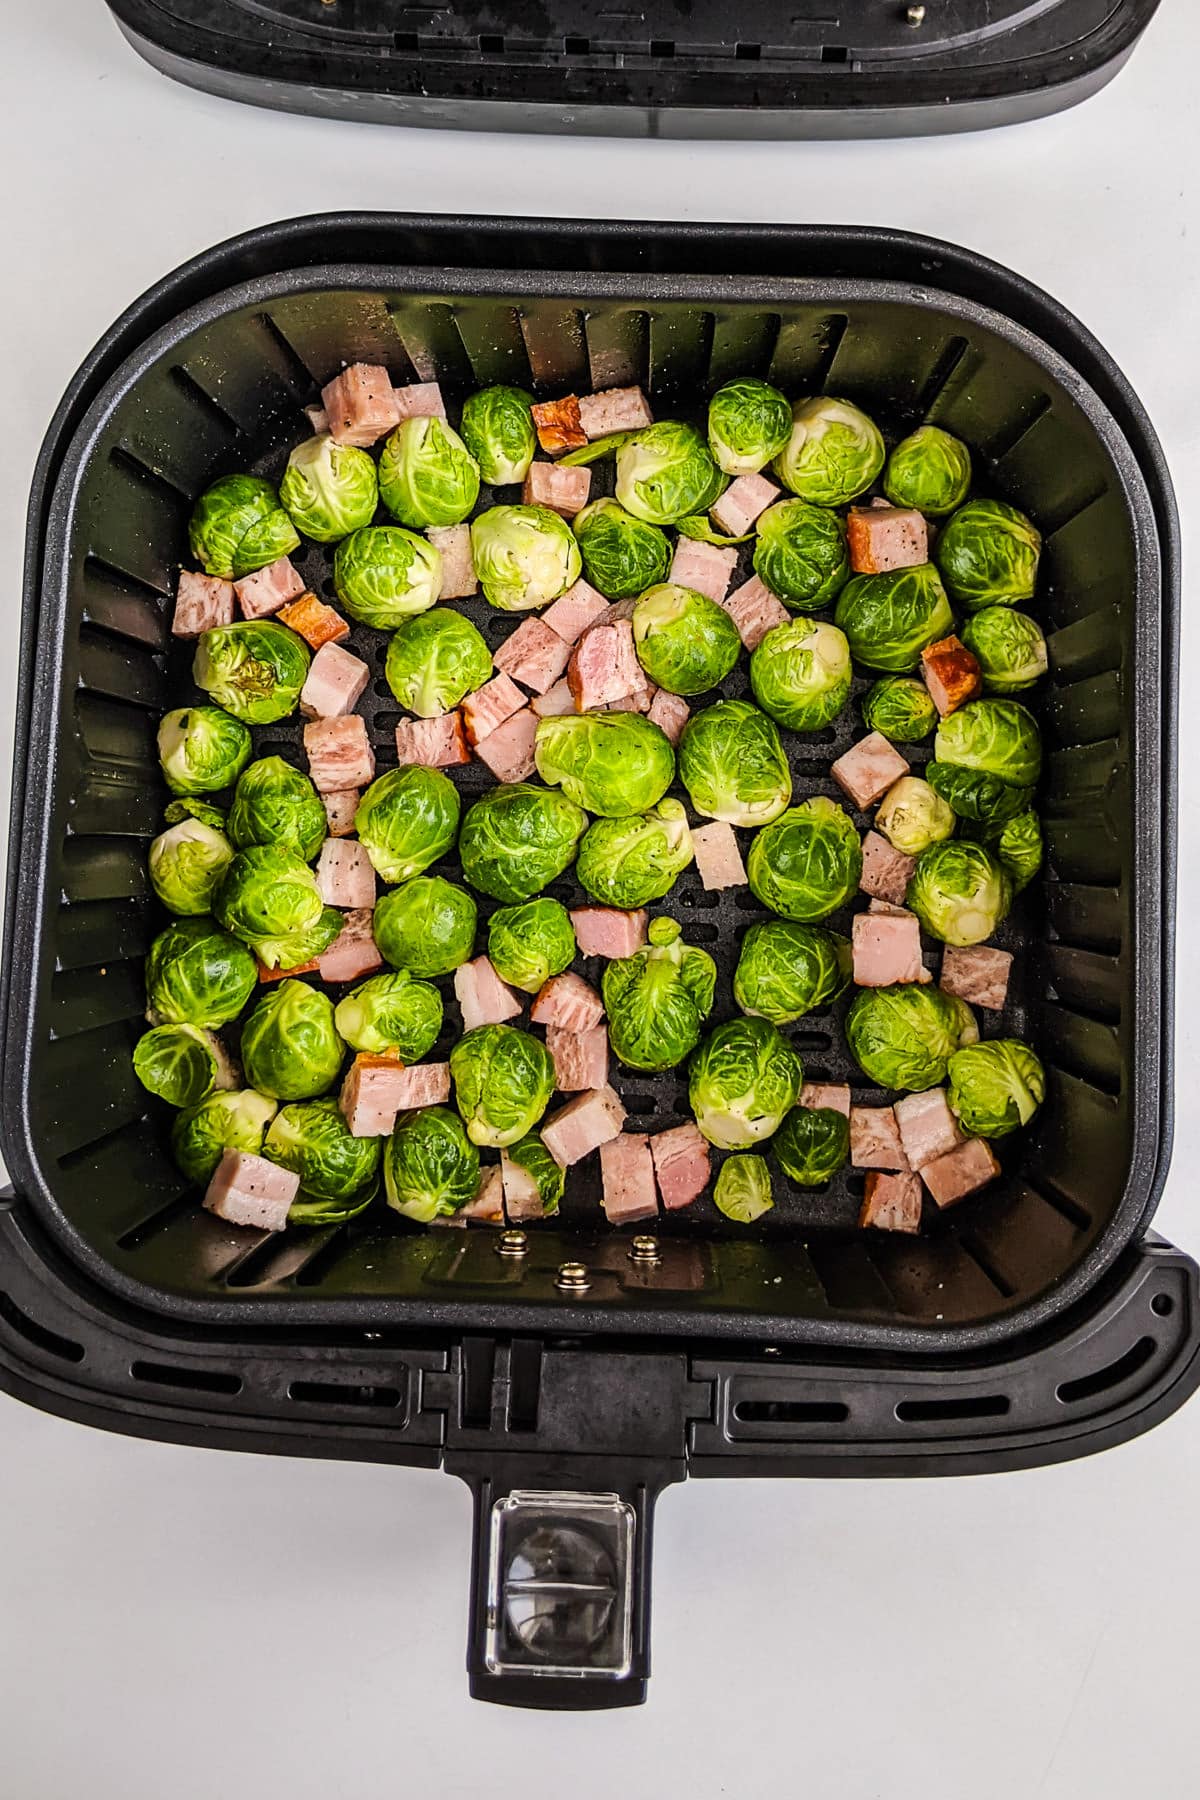 Top view of air fryer basket with brussels sprouts with bacon.